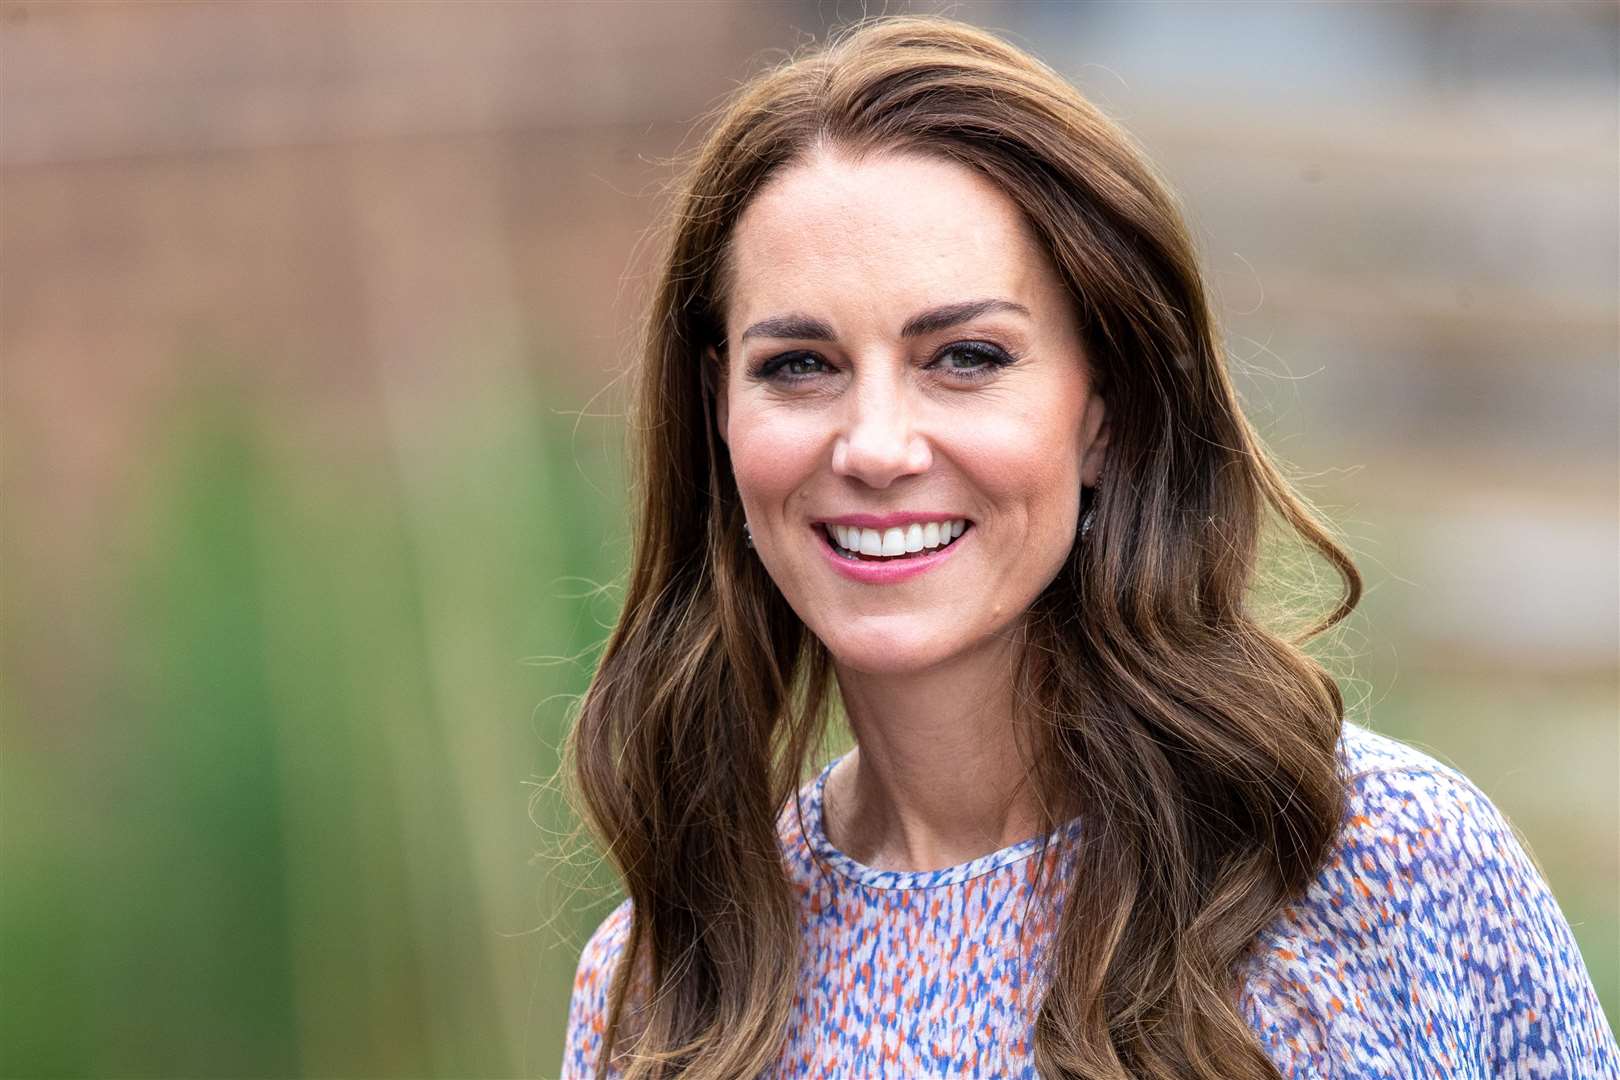 Opinion: 'Princess of Wales Kate Middleton's Shaping Us baby photo ...